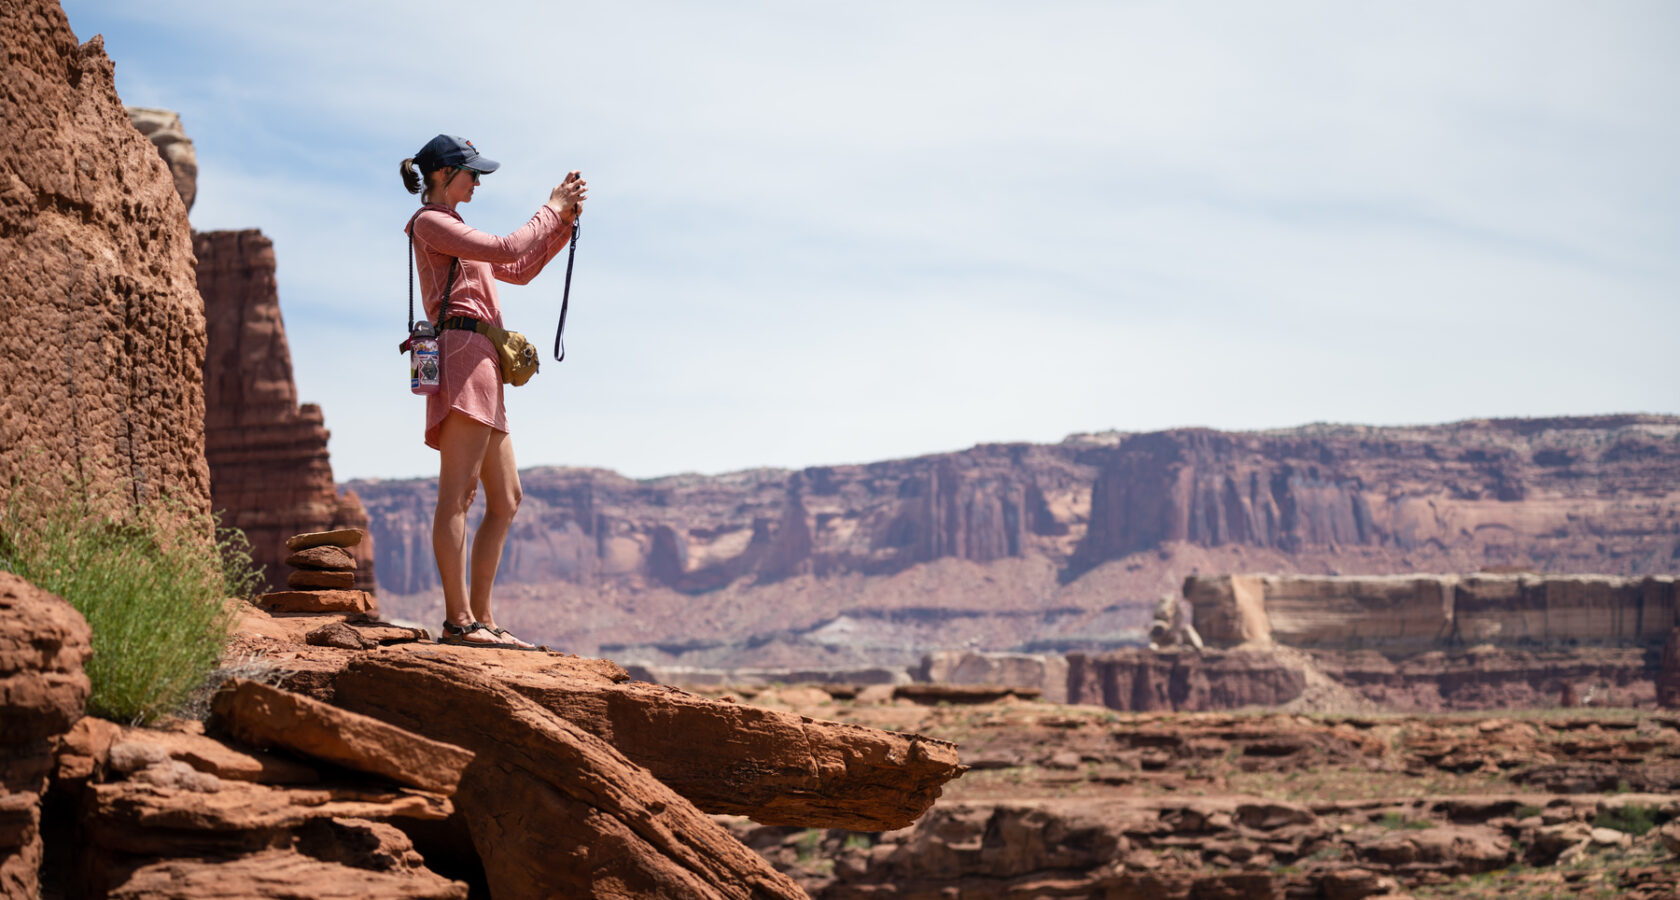 Woman taking a photo from an overlook in Canyonlands National Park